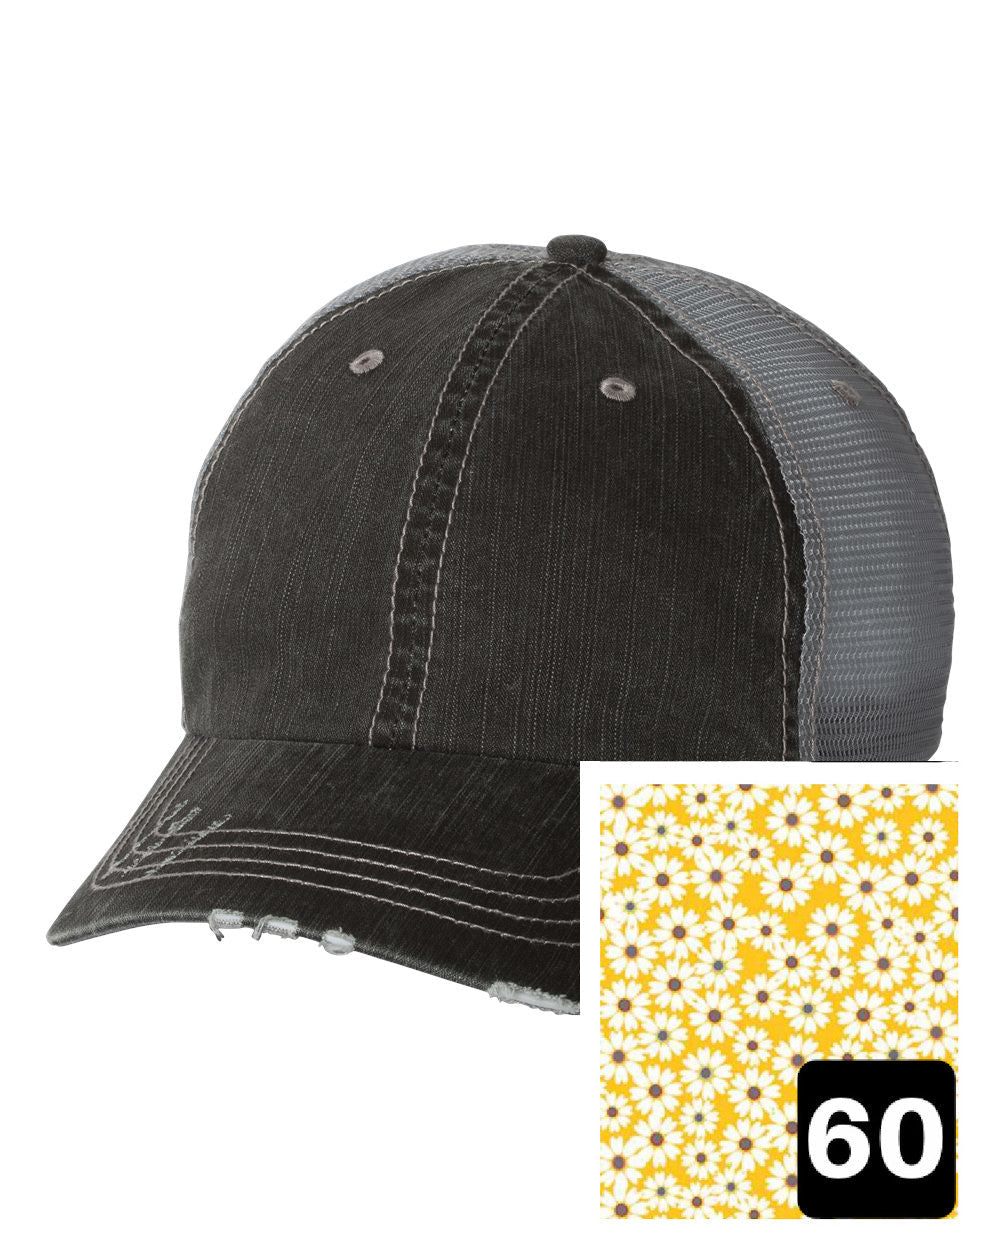 Georgia Hat | Gray Distressed Trucker Cap | Many Fabric Choices